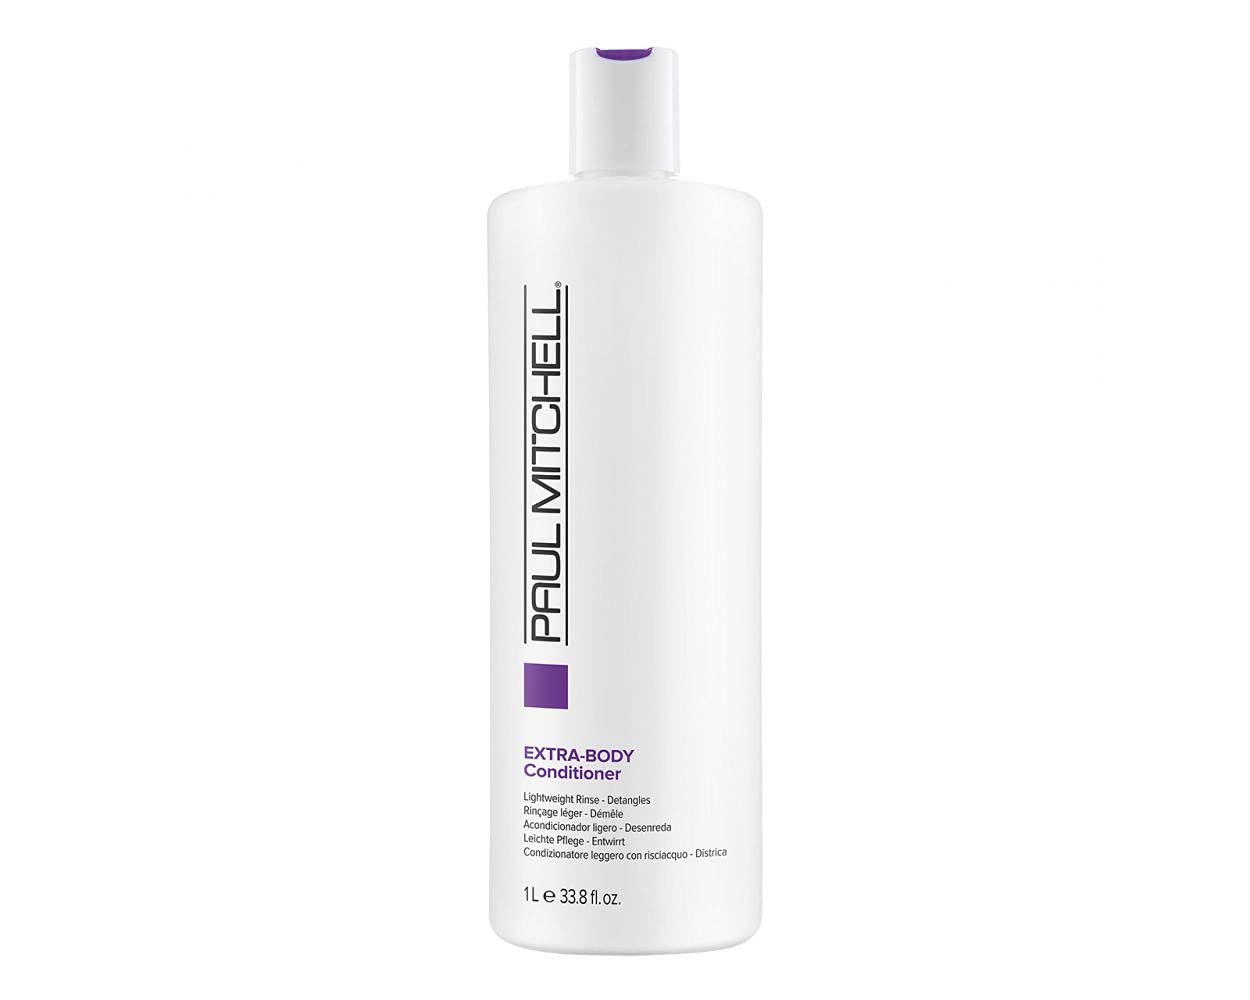 Paul Mitchell Extra-Body Conditioner, Detangles + Volumizes, For Fine Hair